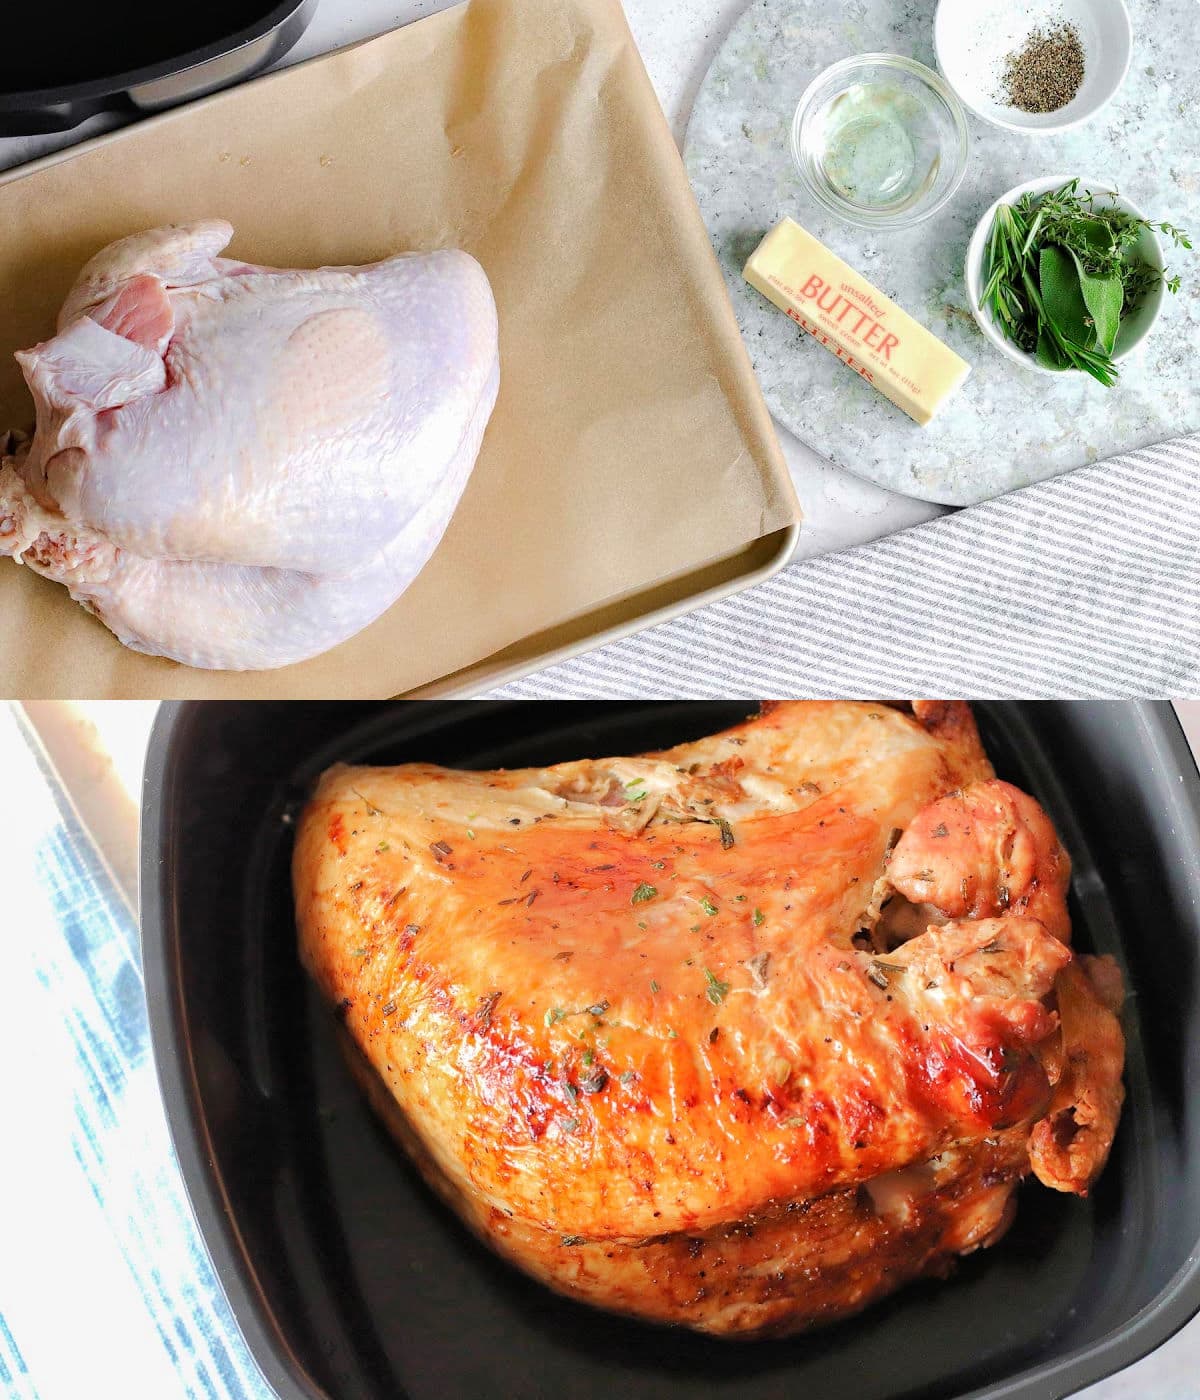 two image collage showing turkey breast next to air fryer with ingredients laid out and the bottom image shows an air fried turkey breast in the air fryer basket.